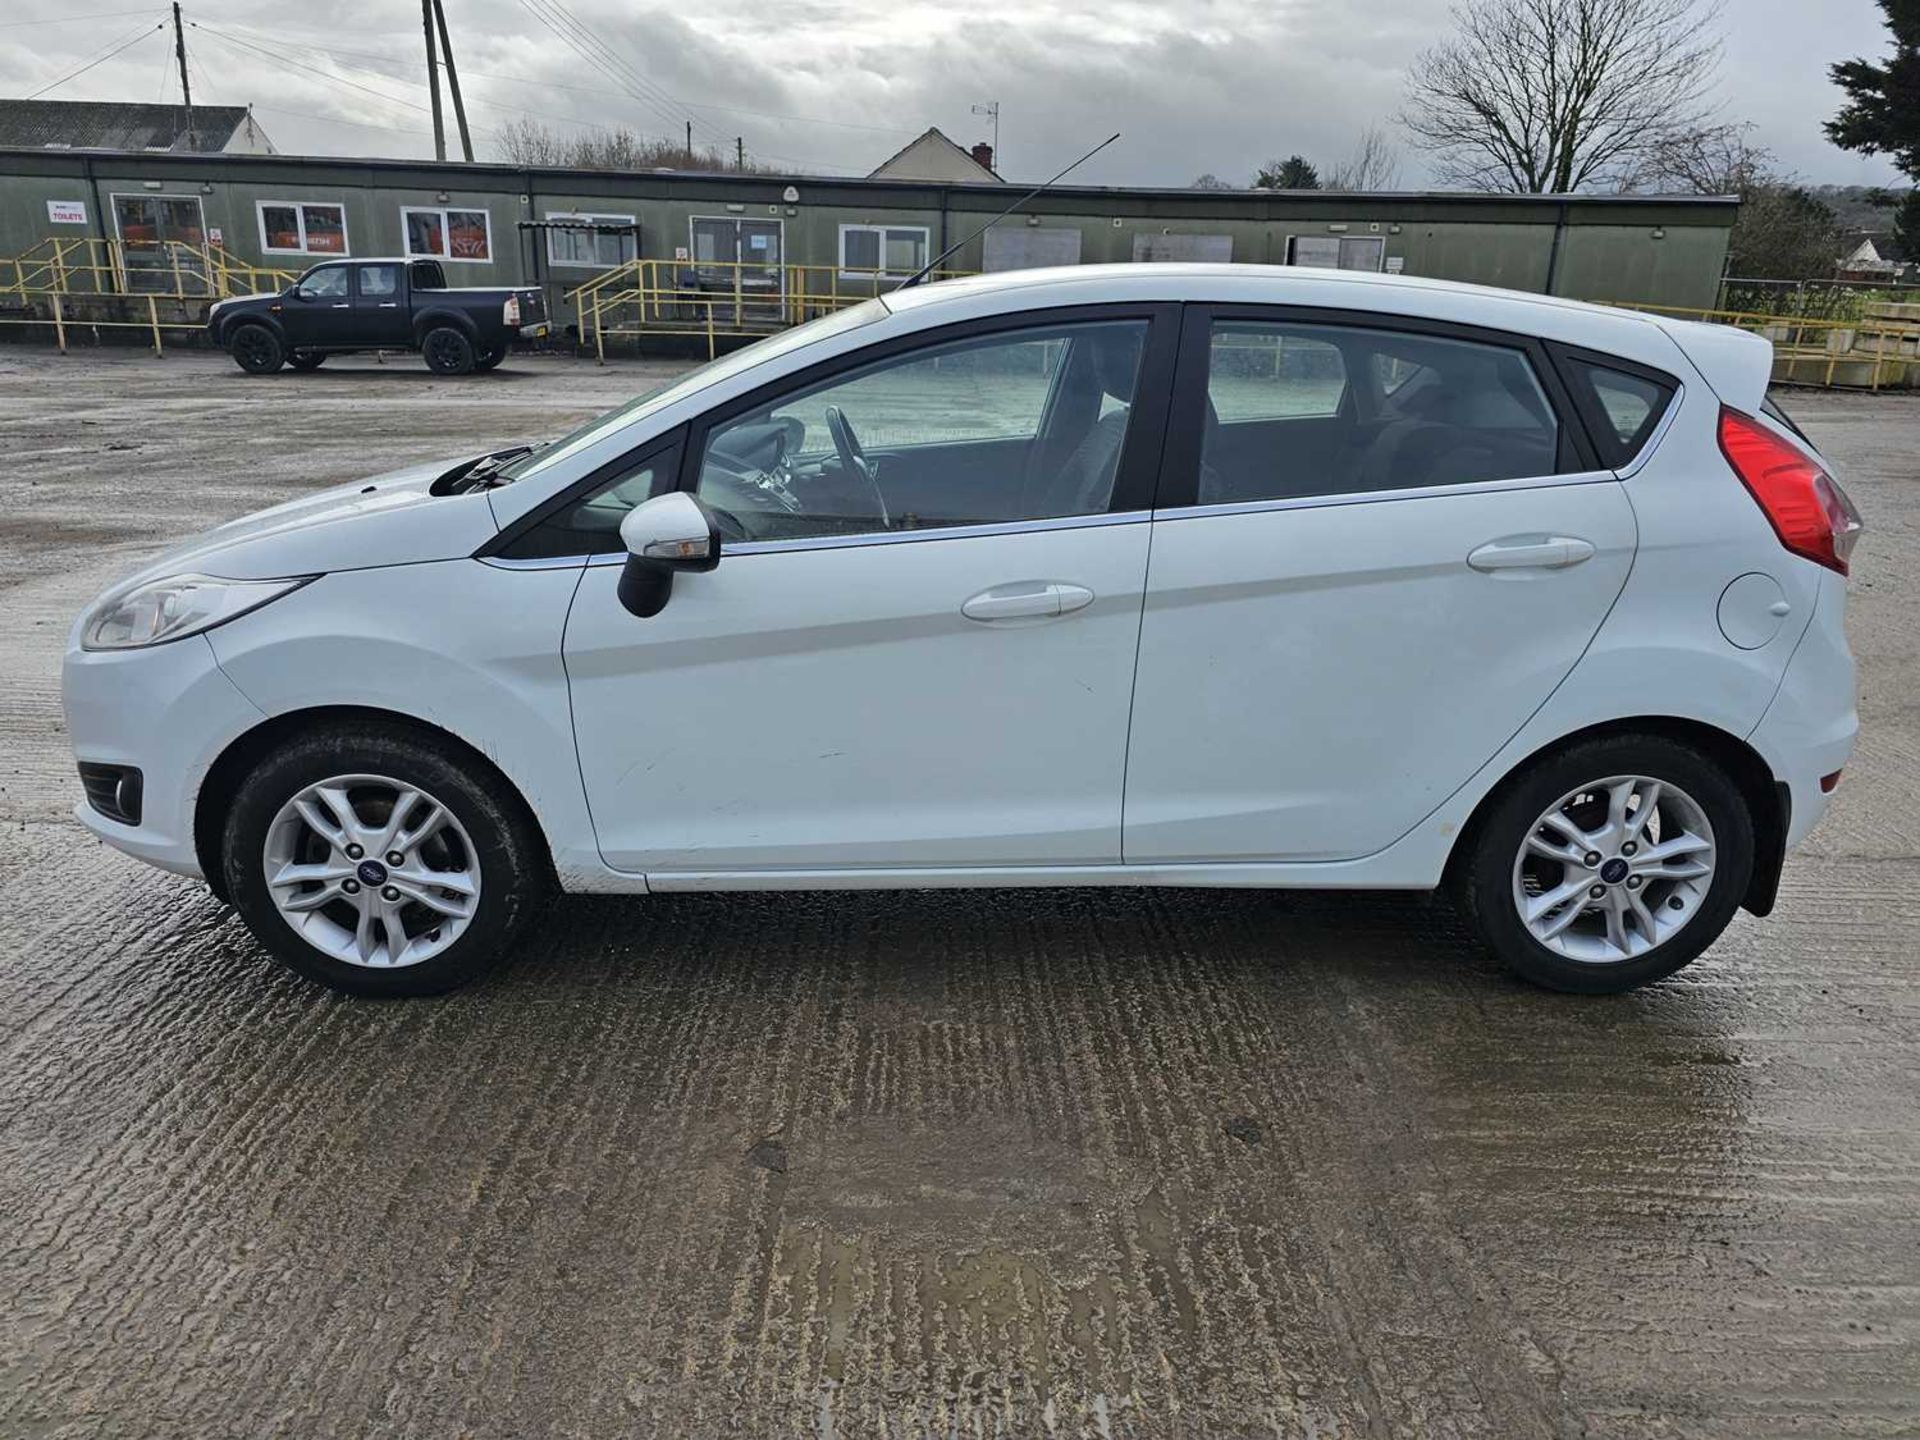 2015 Ford Fiesta, 5 Speed, Bluetooth, A/C (Reg. Docs. & Service History Available, Tested 01/25) - Image 6 of 28